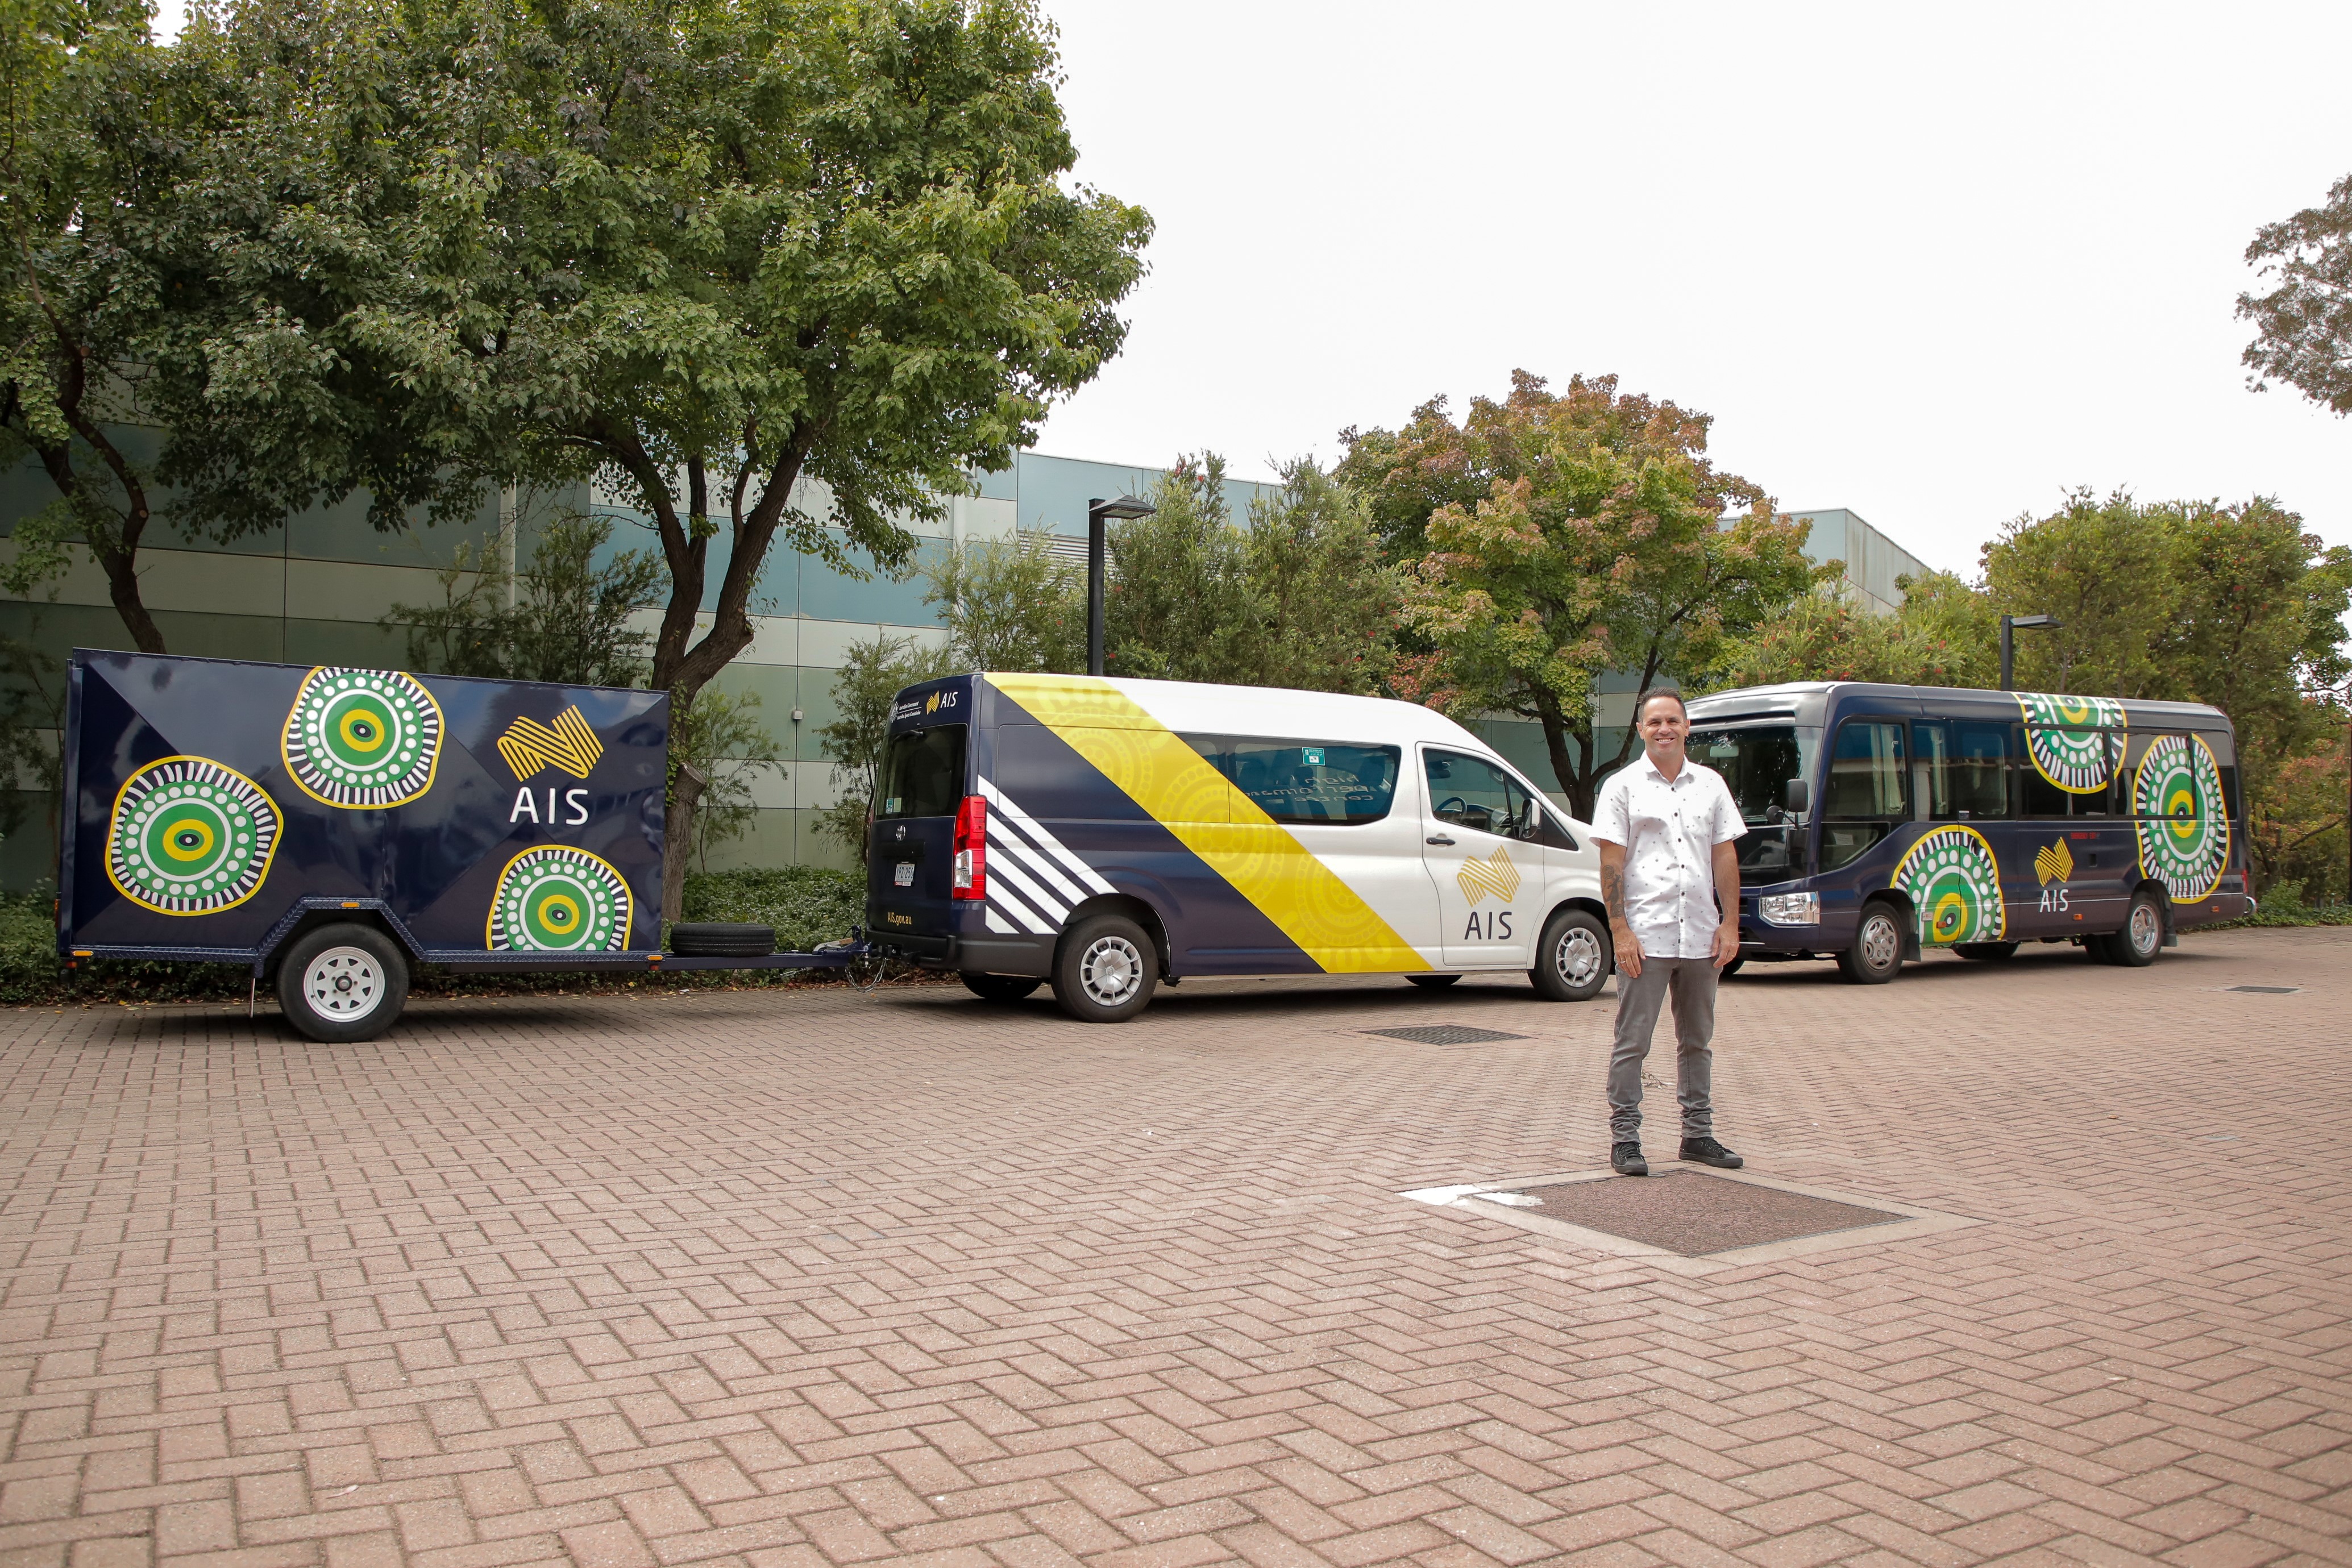 Artist Brad Hore pictured beside different AIS vehicles featuring his 'Kinship' artwork.